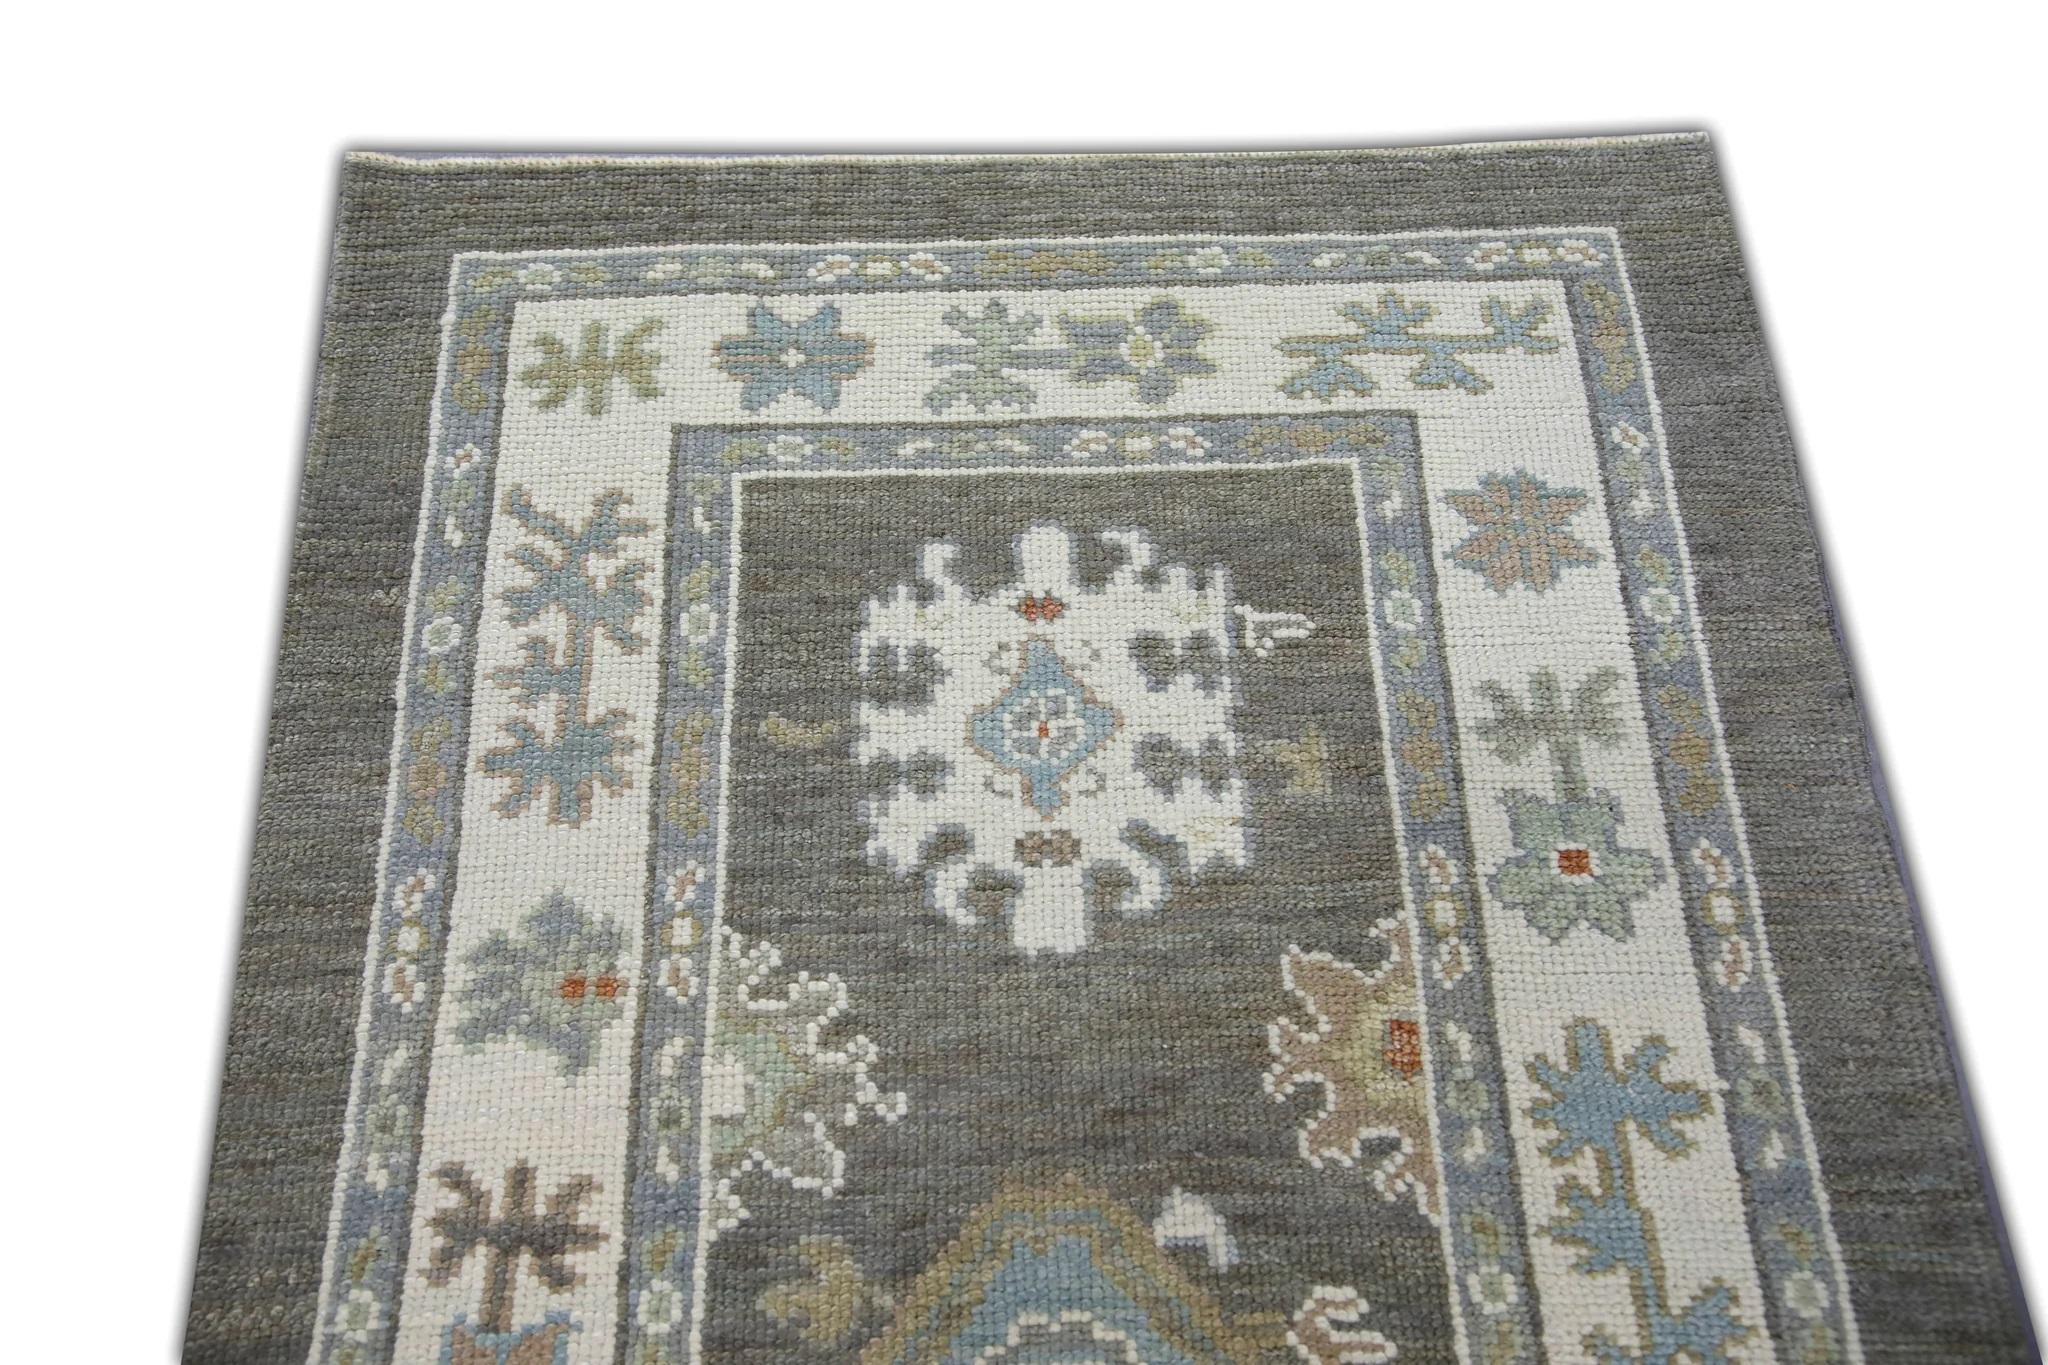 Olive Green Floral Handwoven Wool Turkish Oushak Rug 3' x 5'4